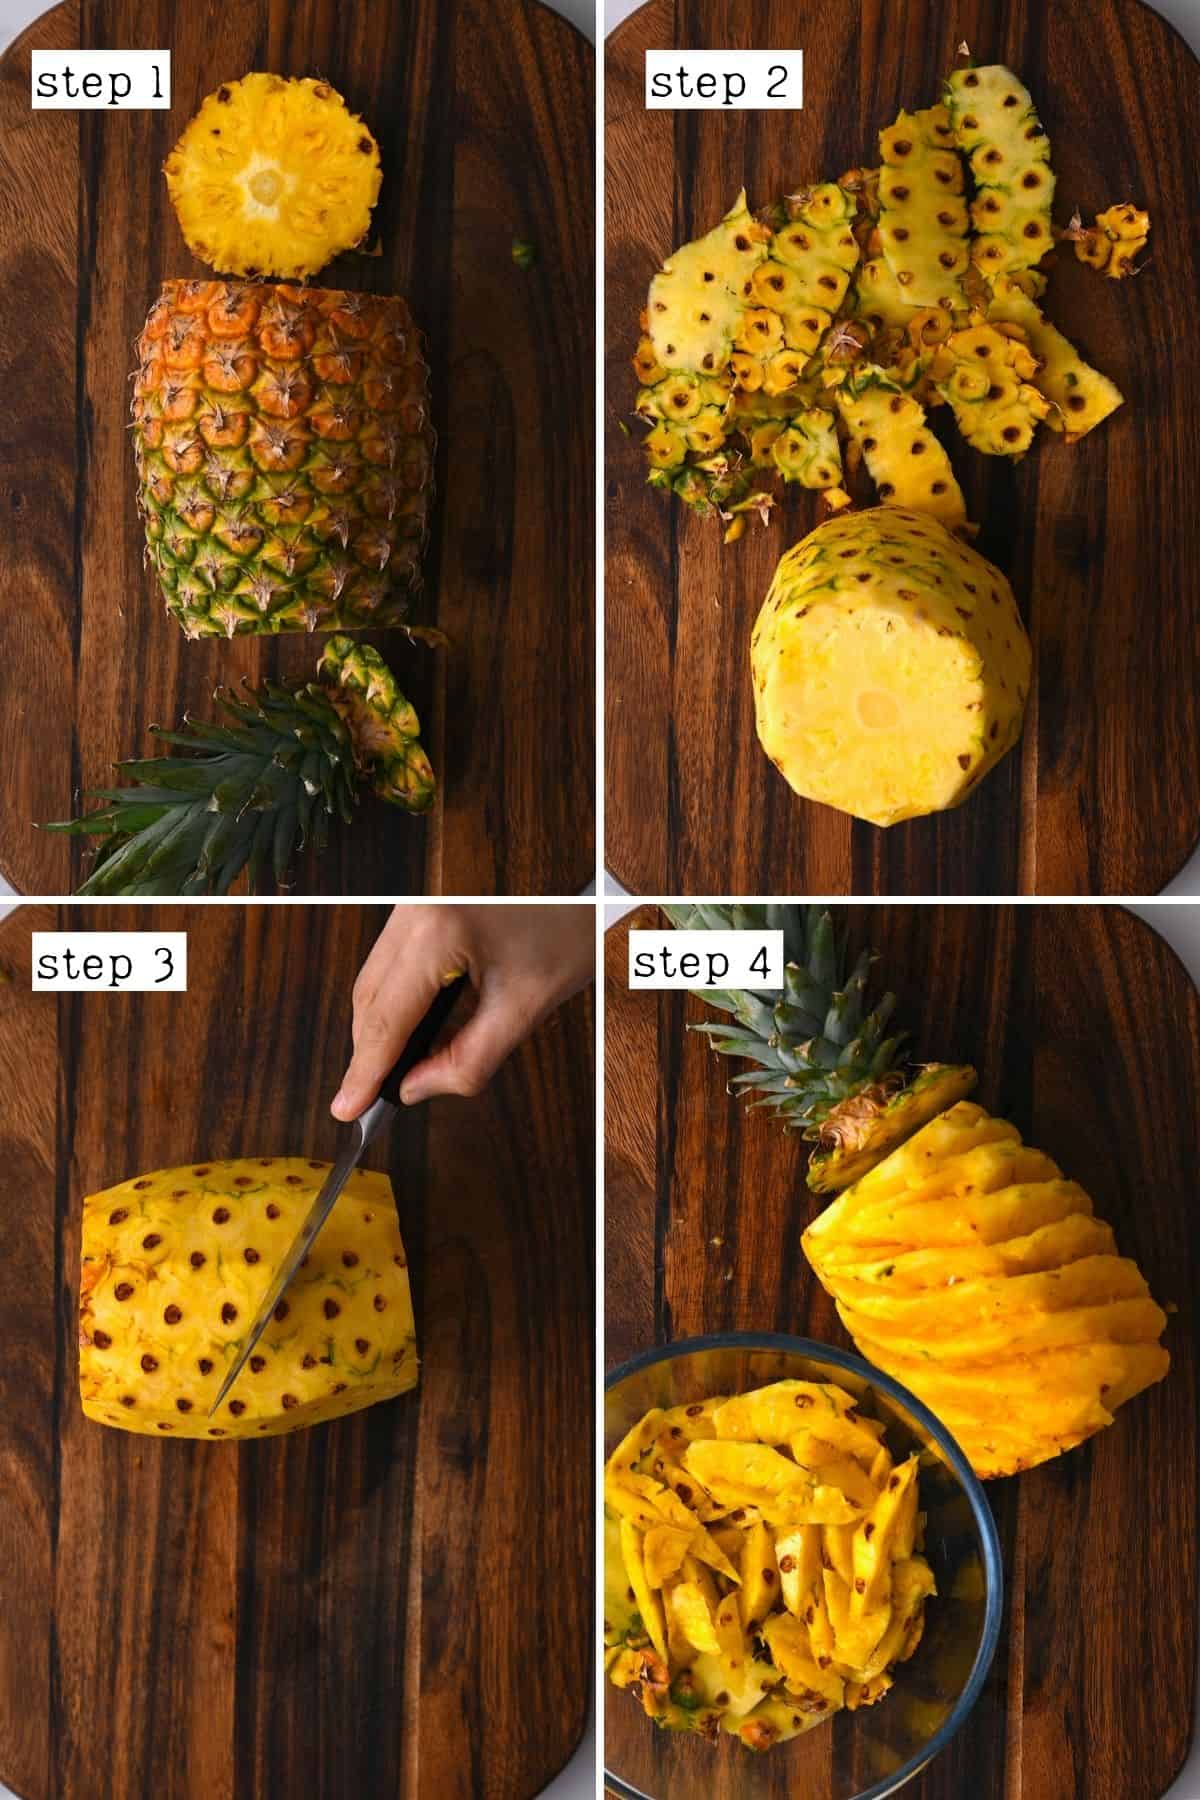 Steps for peeling and cutting a pineapple